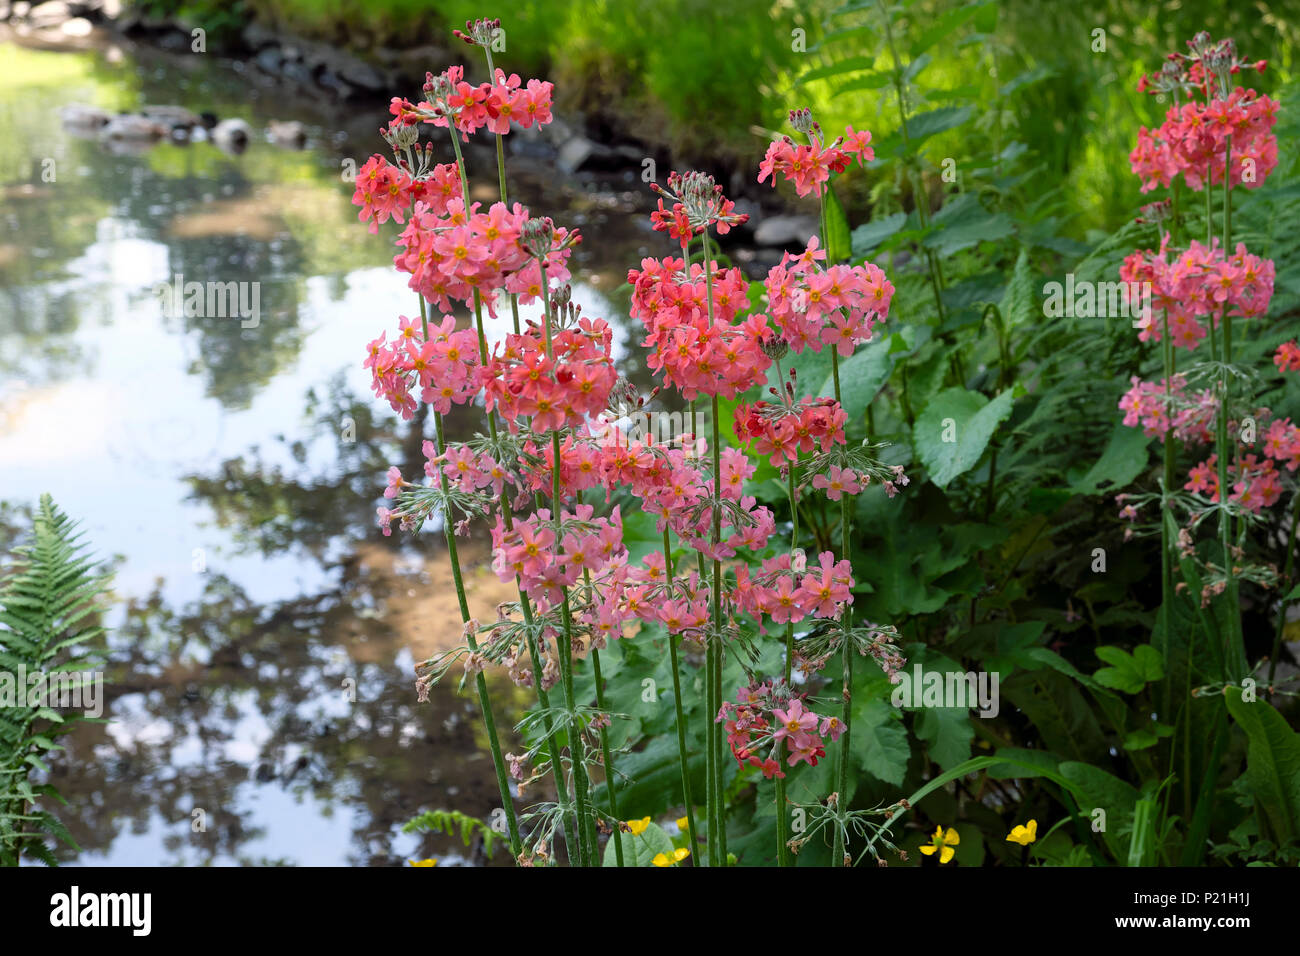 Candelabra primrose growing near a pond in a shady area in a garden in June spring in rural Wales Great Britain UK    KATHY DEWITT Stock Photo